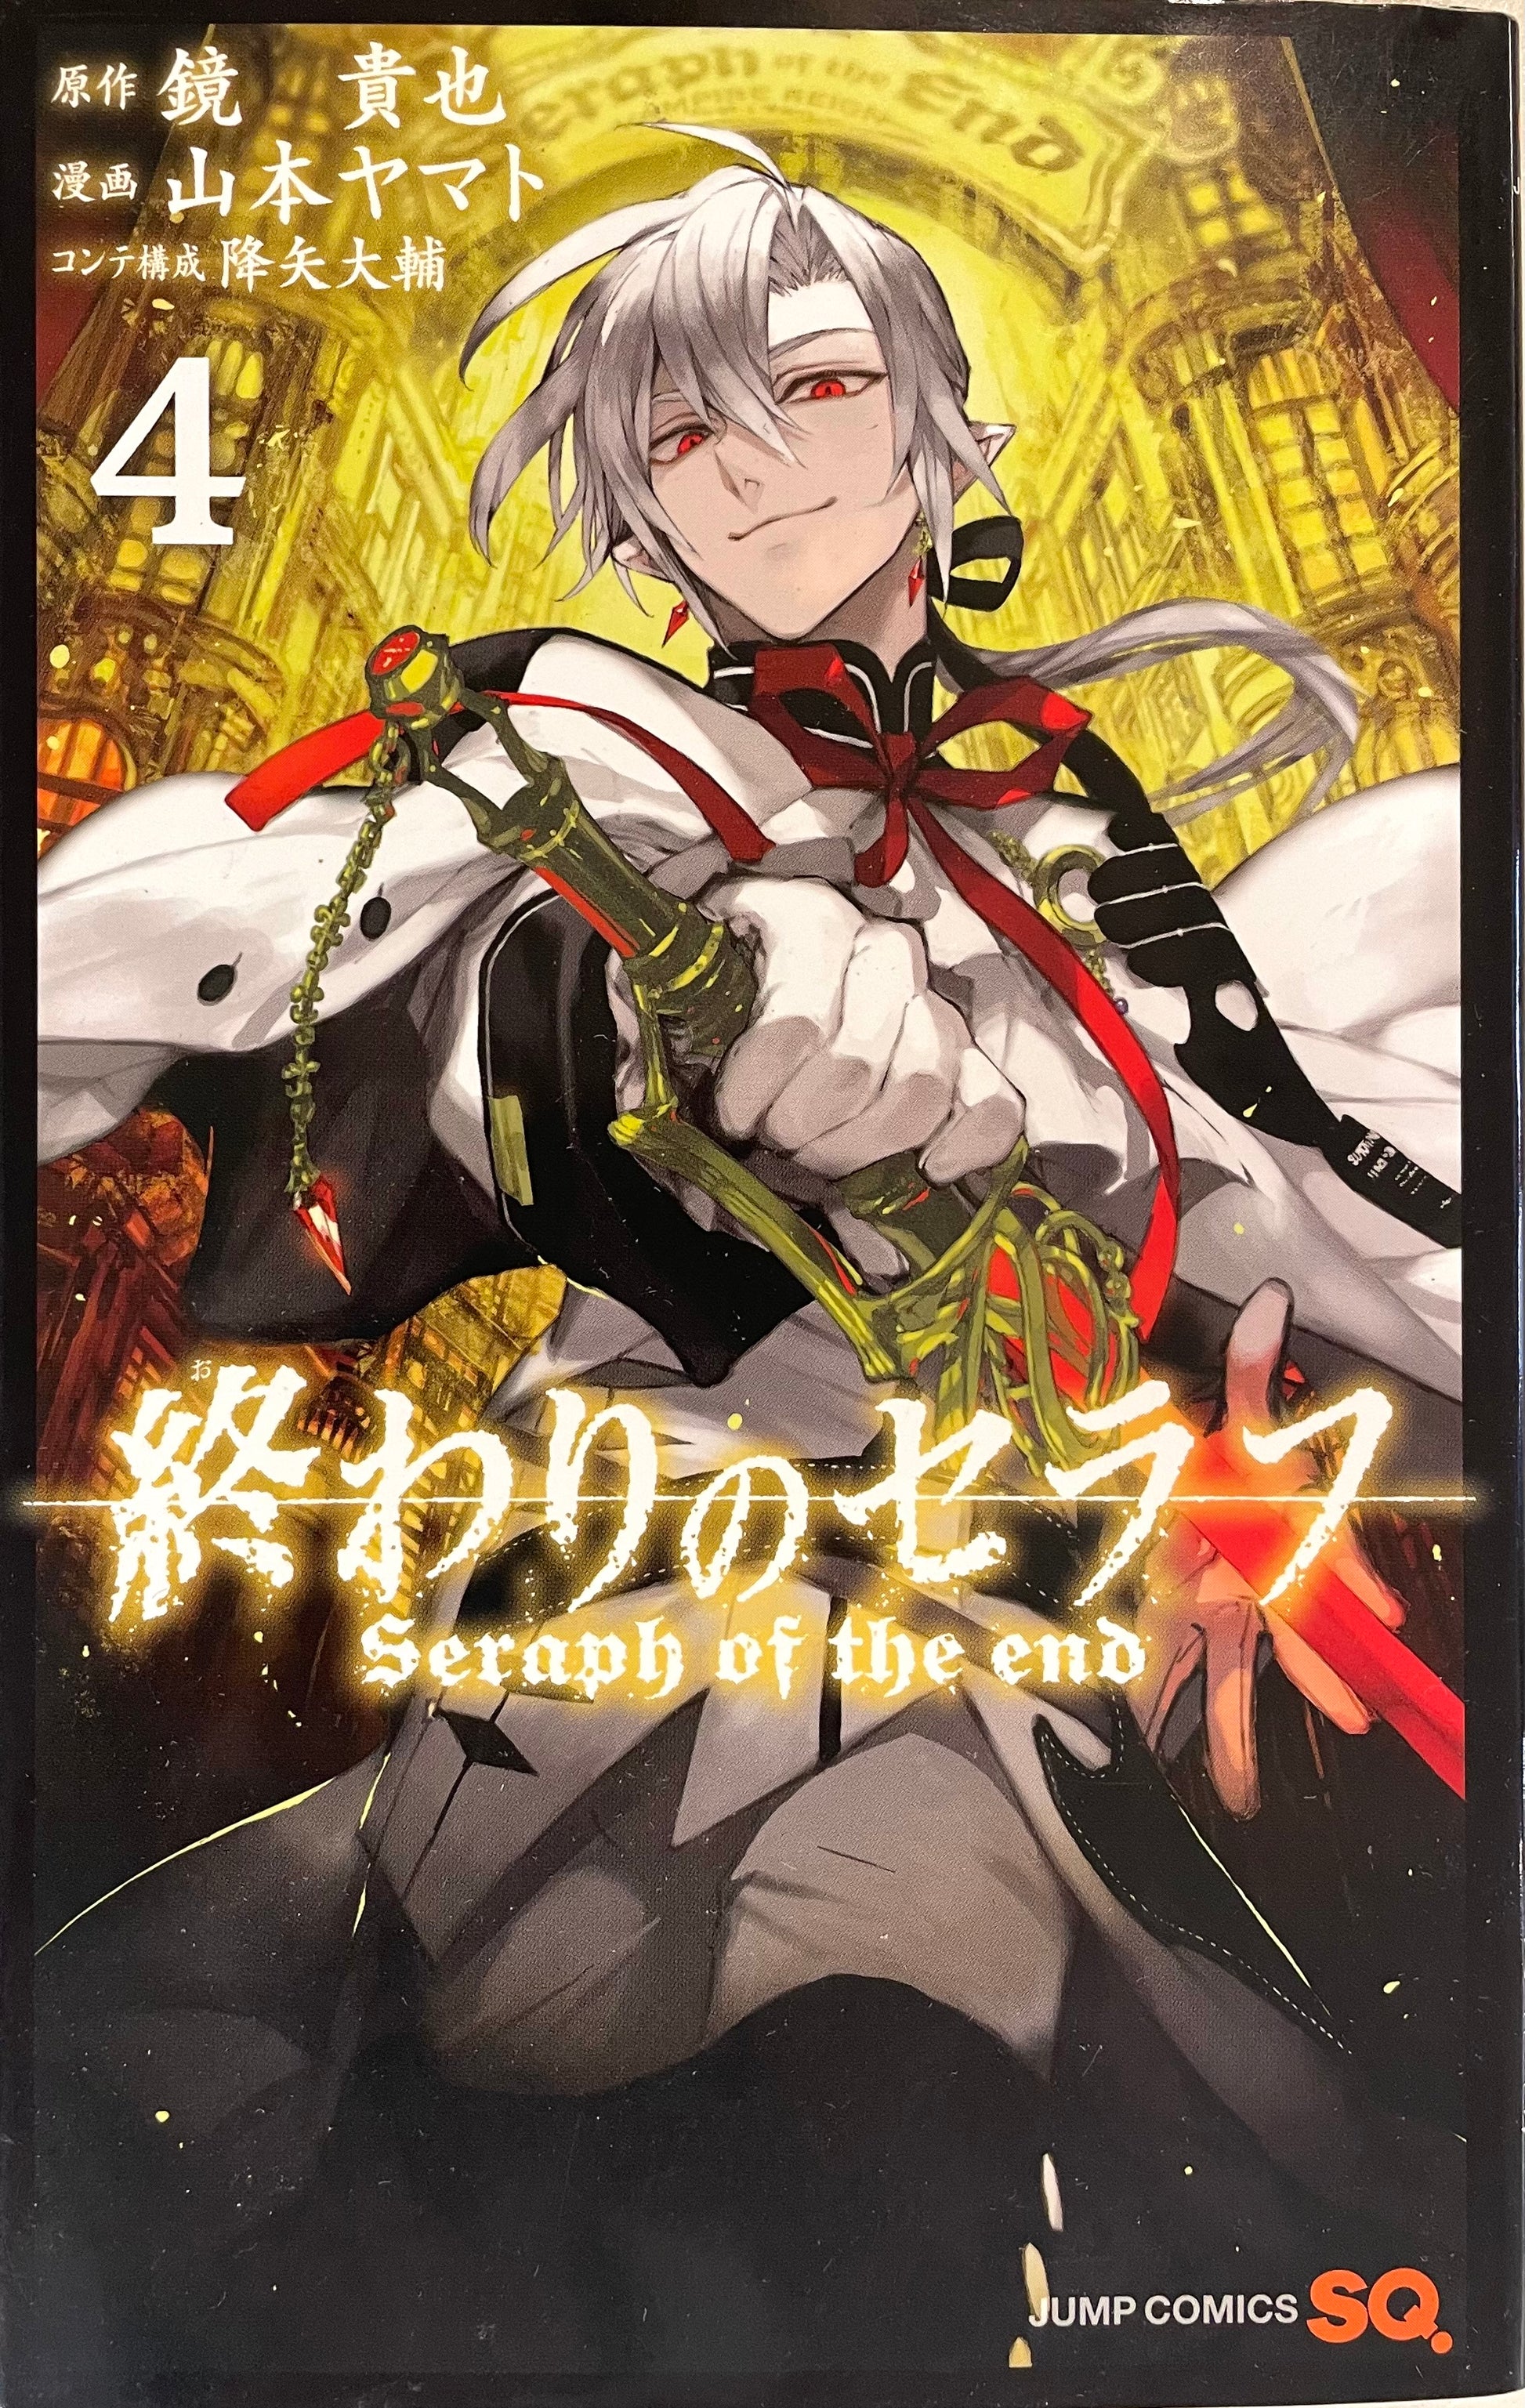 Seraph of the end Vol.4-Official Japanese Edition